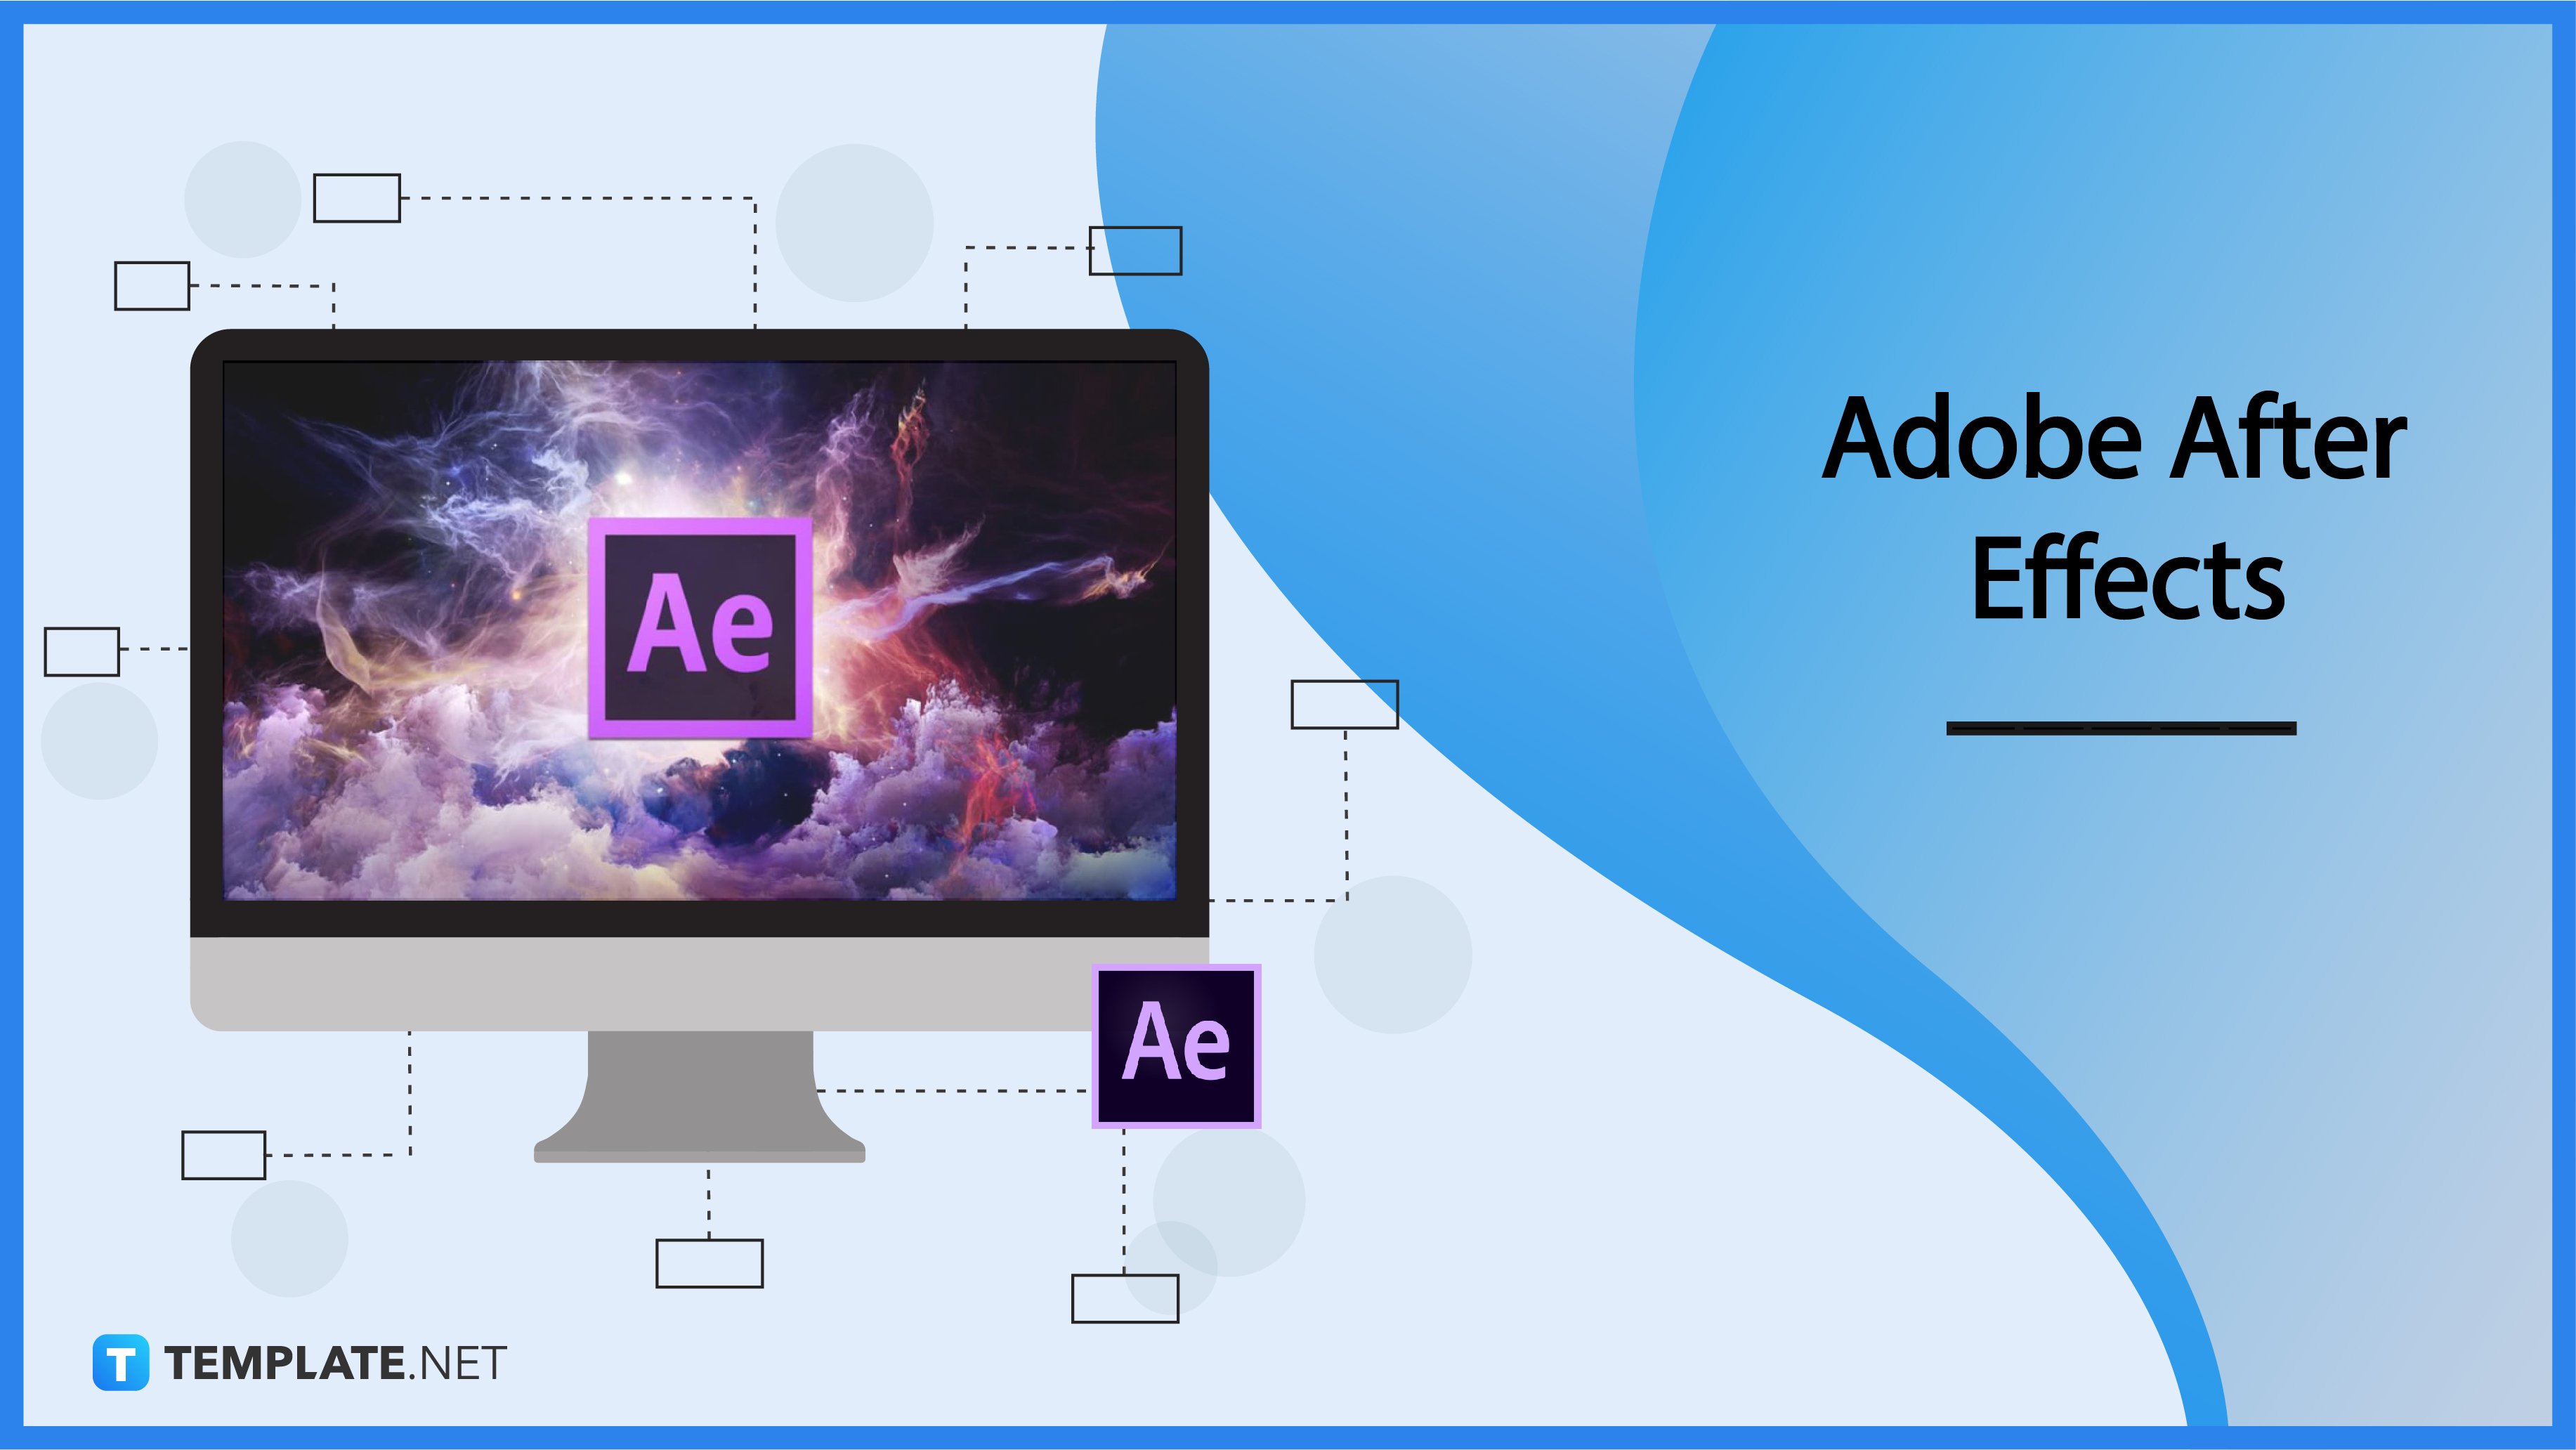 Adobe After Effects - What is an Adobe After Effects? definition, uses